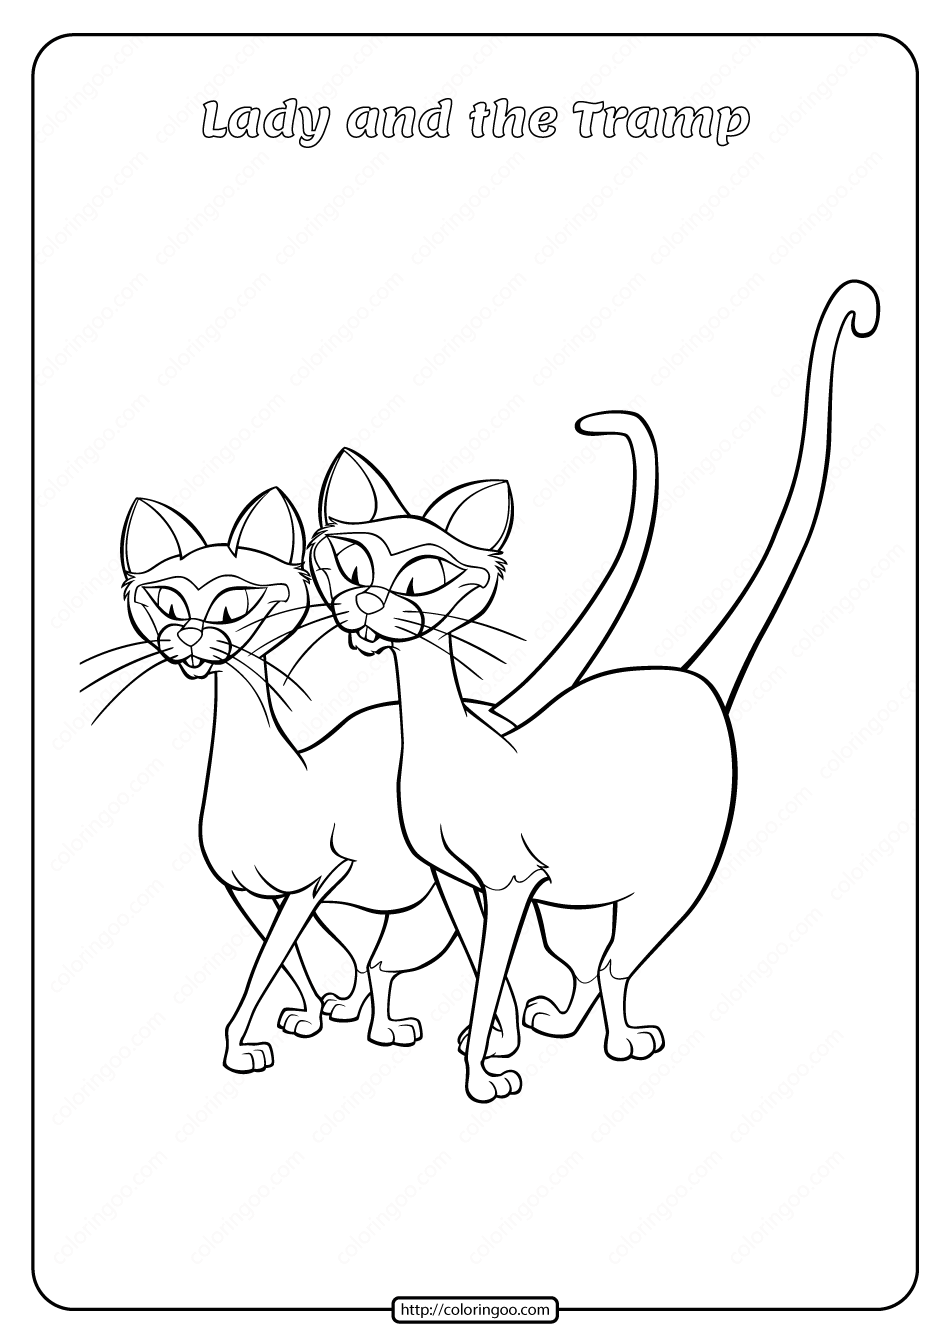 Printable Lady and the Tramp Coloring Page 04